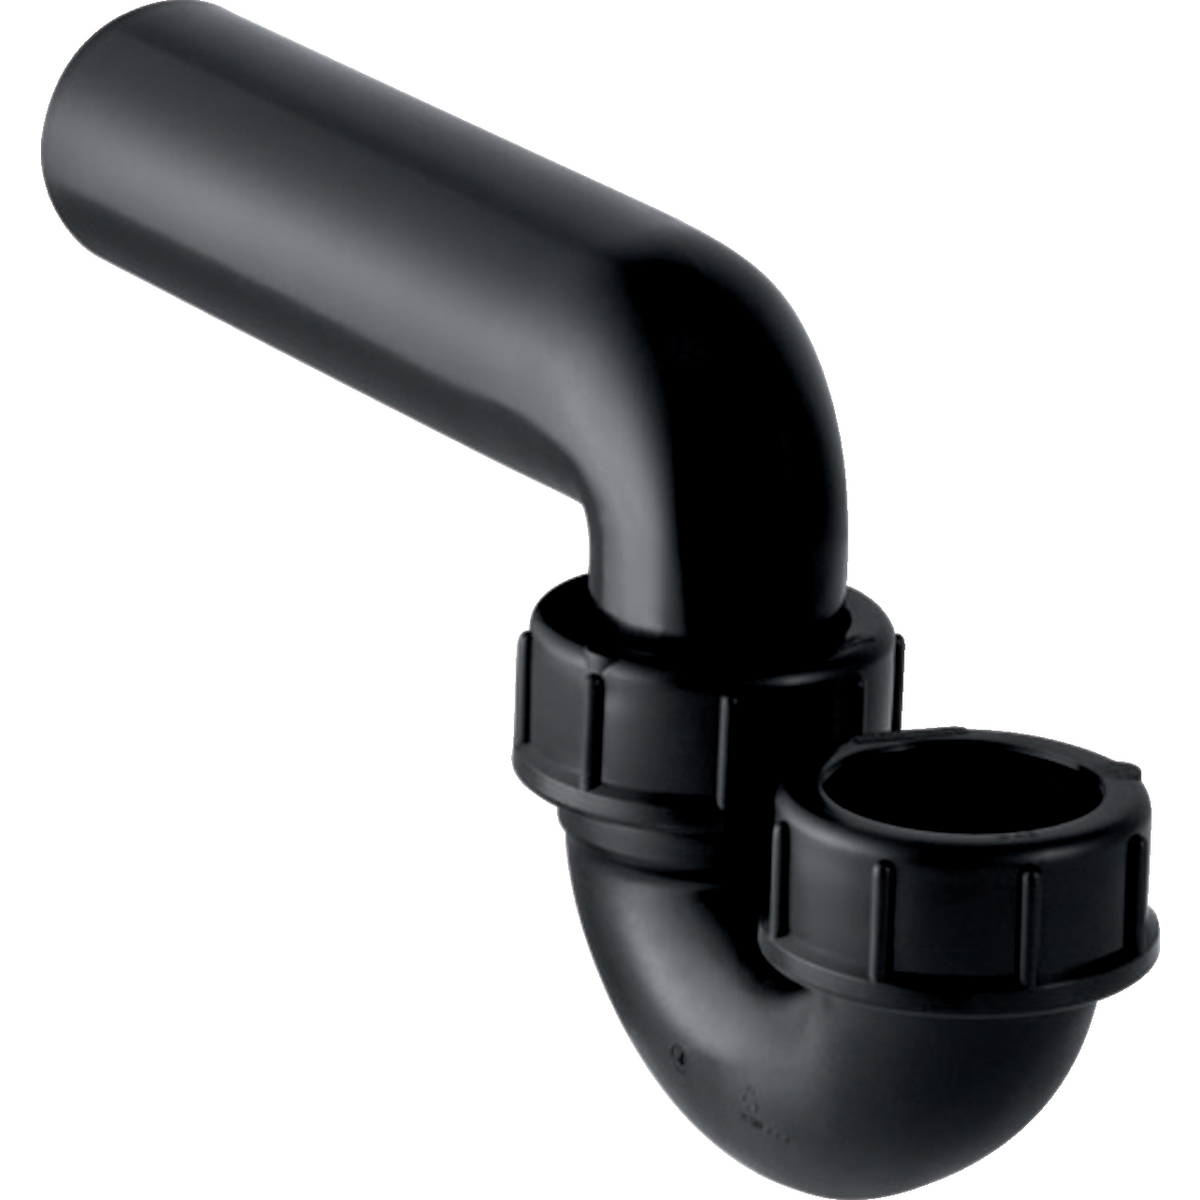 Geberit 152.039.16.1 P-Trap for Sink, with Compression Joint, Vertical Inlet and Horizontal Outlet: D=50Mm, D1=50Mm - Black